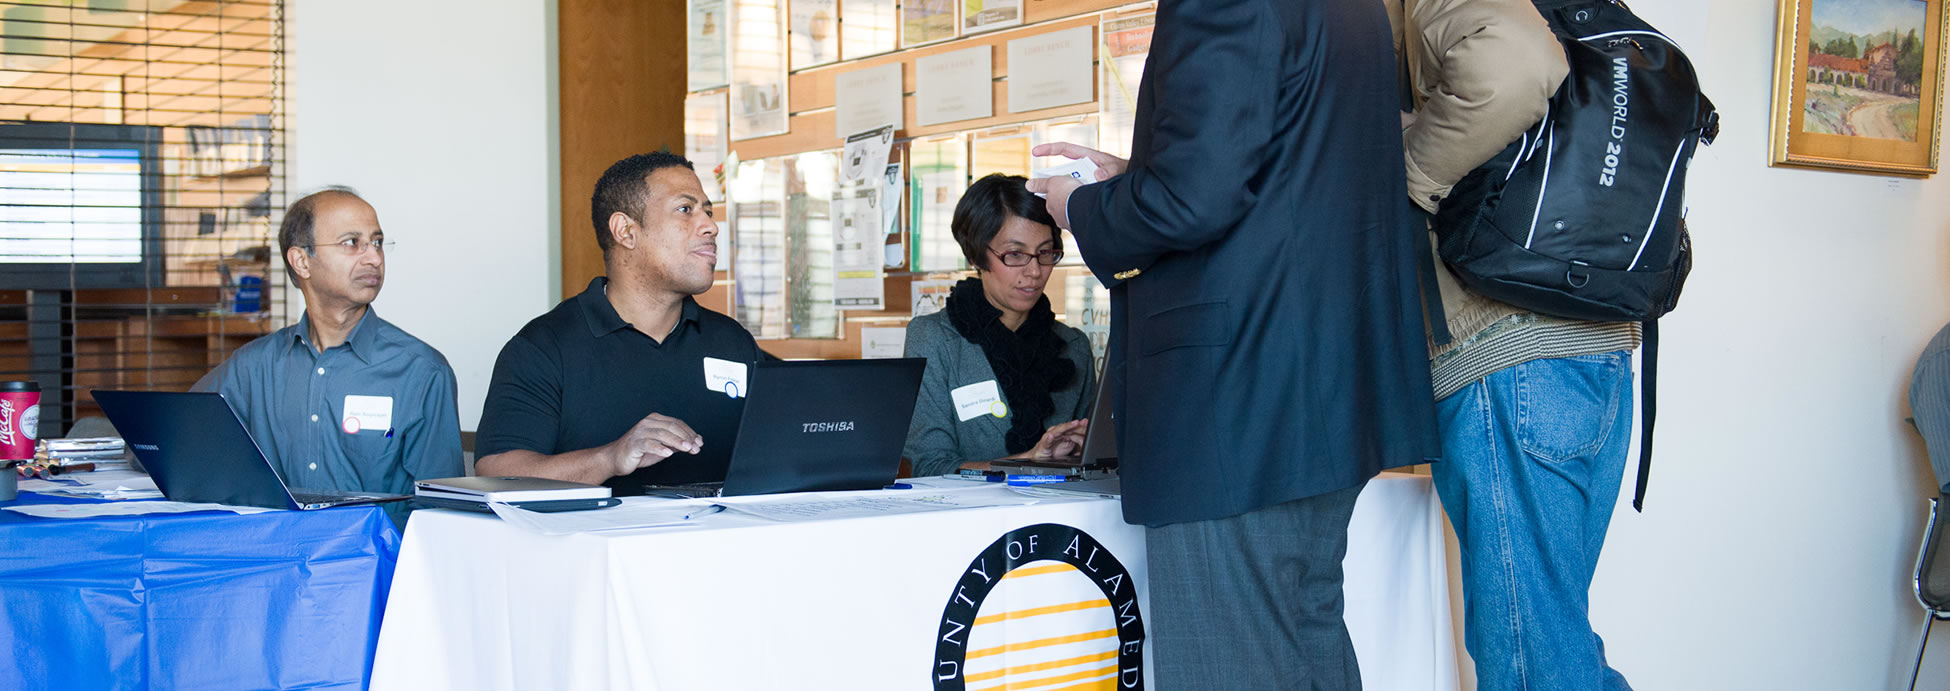 Photo of Alameda County employees registering hackathon participants.